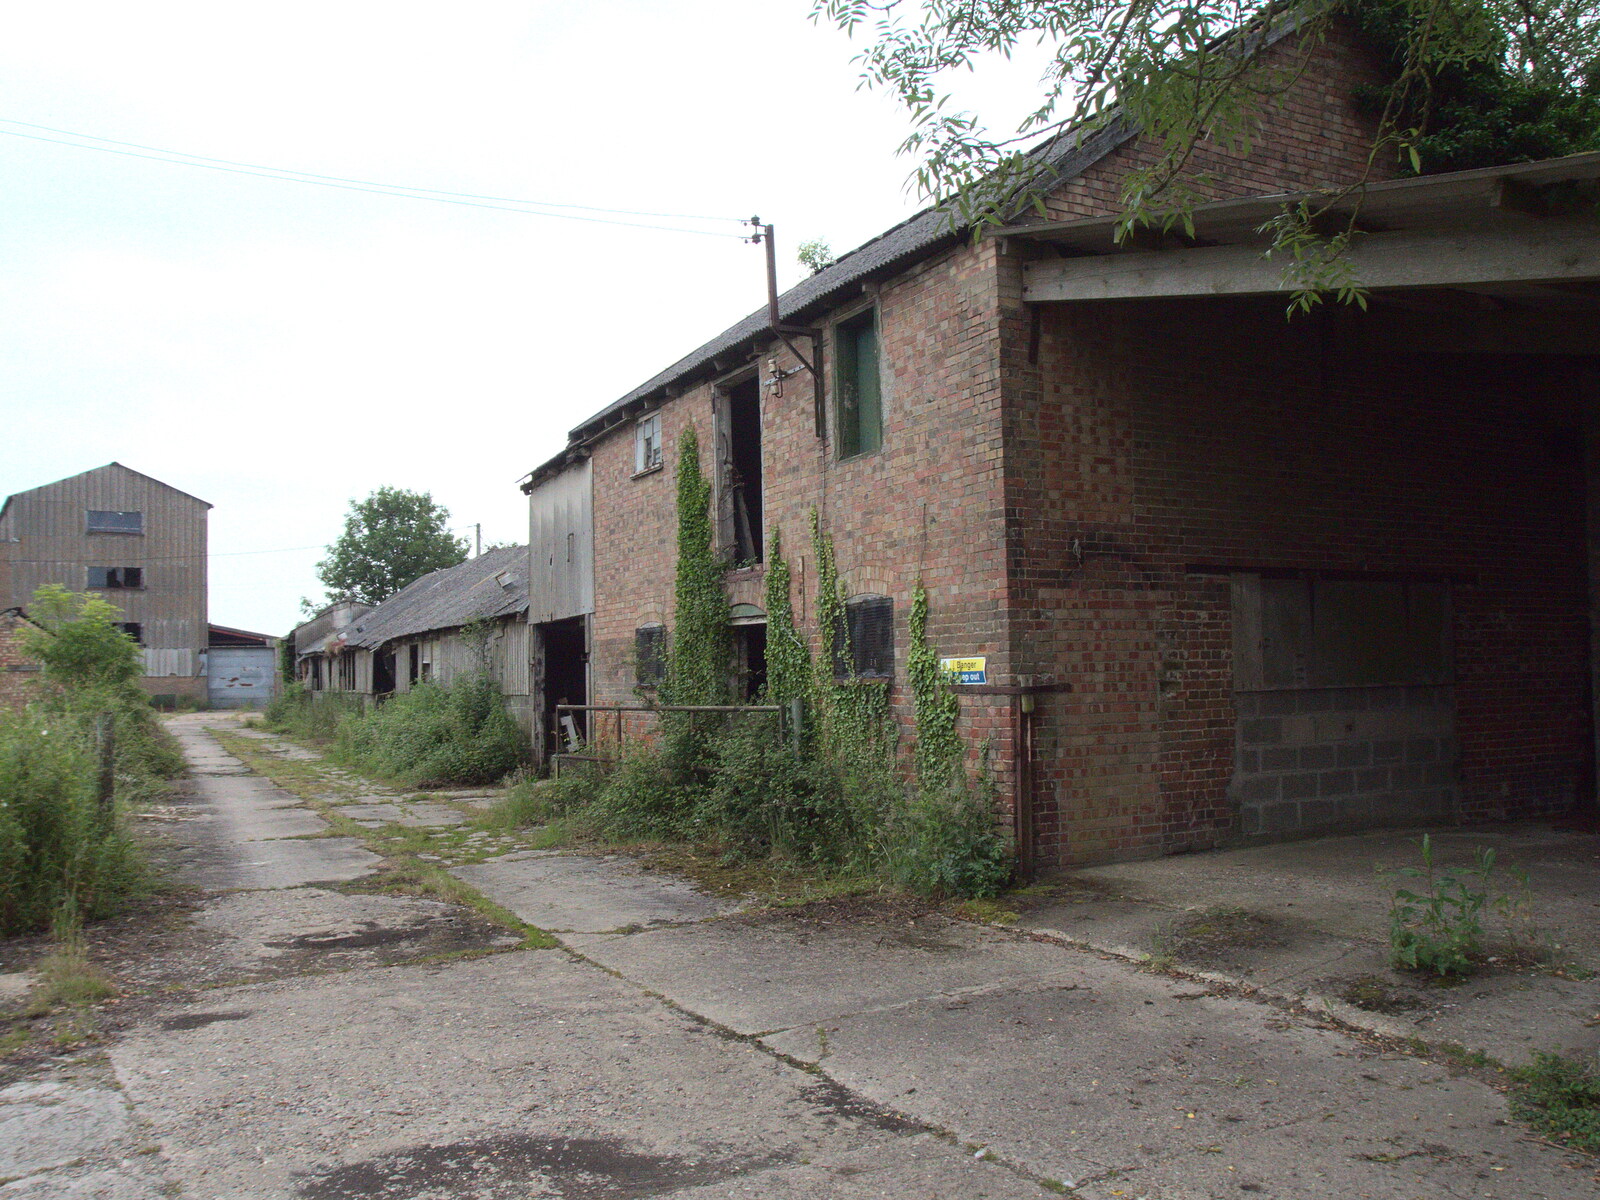 Derelict buildings near Kenton from The BSCC at Earl Soham and at Colin and Jill's, Eye, Suffolk - 26th June 2021